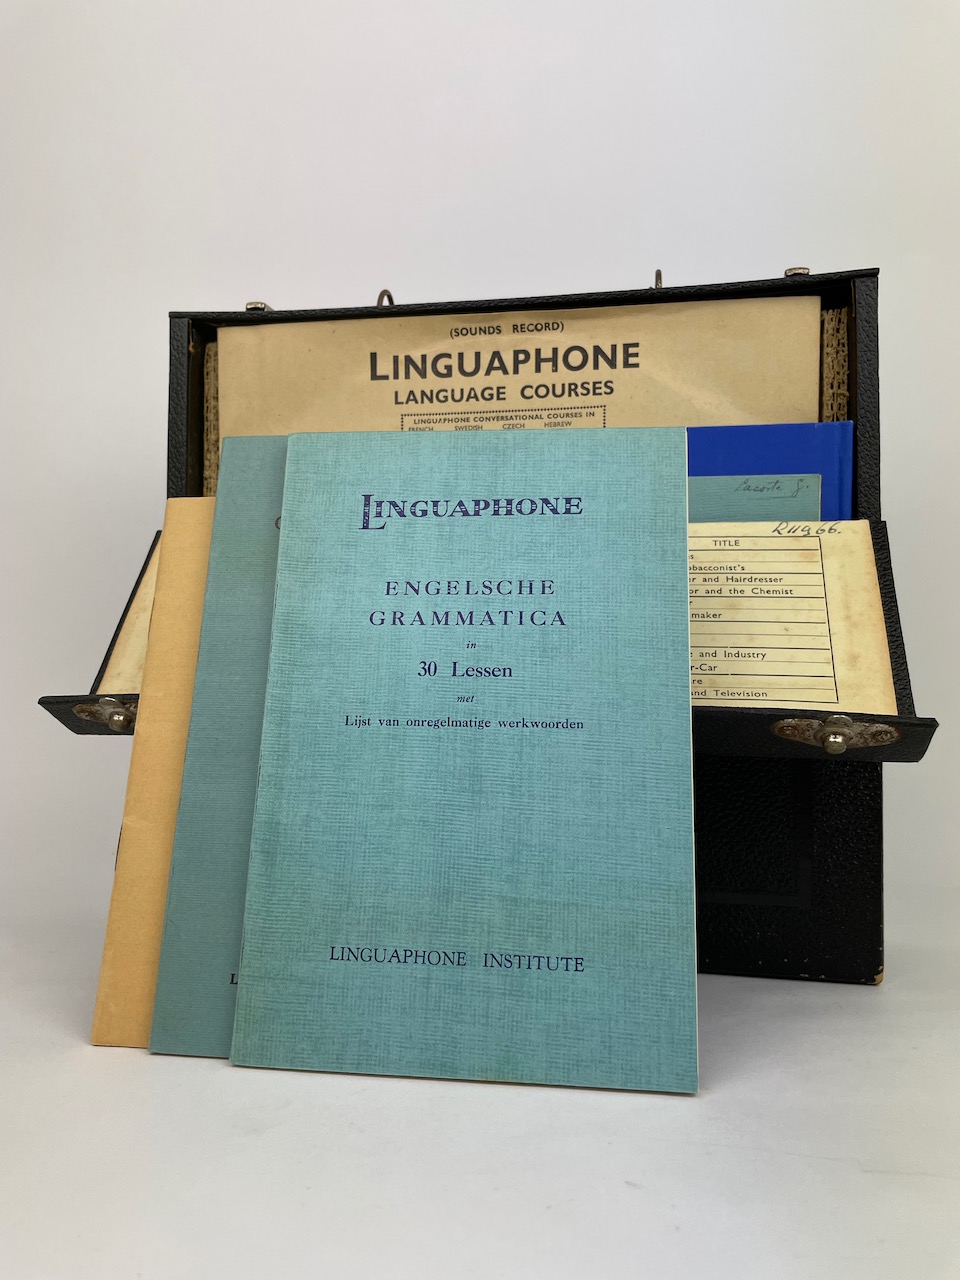 Linguaphone Conversational Course English - Complete set - 16 records and 5 booklets in original box 5